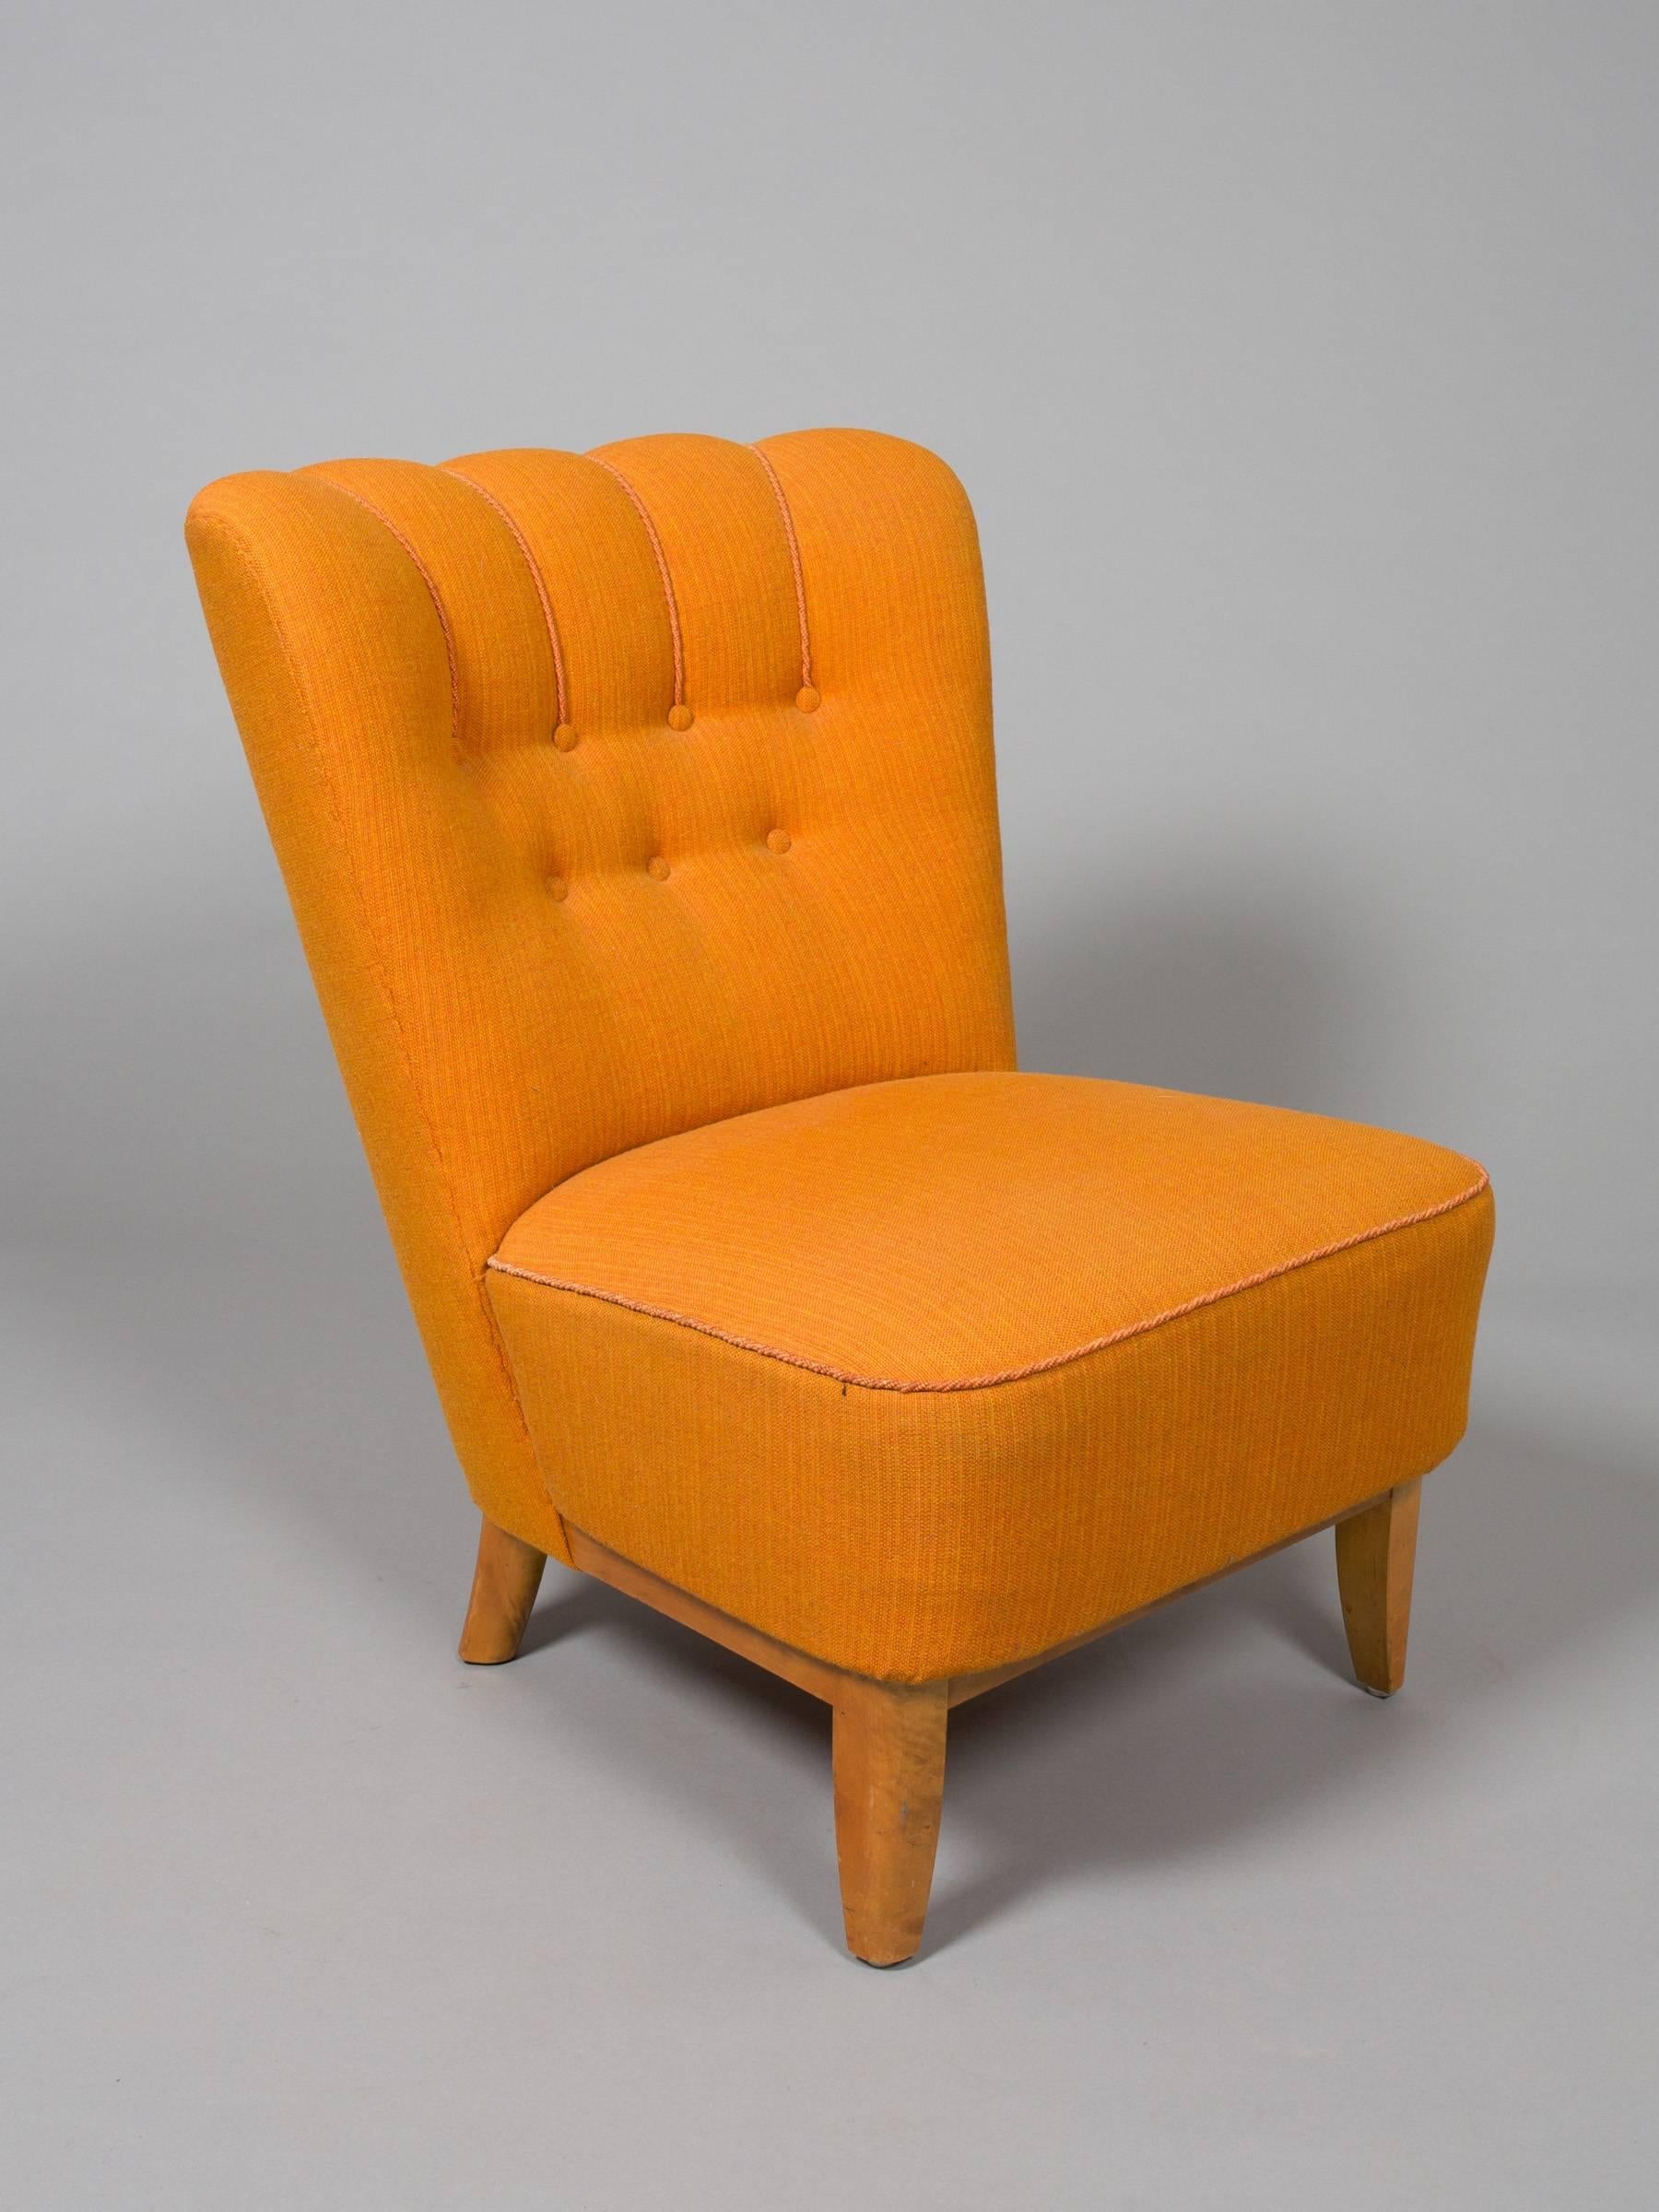 Stylish, Mid-Century Danish armless chairs with birch legs and button tufting. Upholstered in an orange texture fabric. Matching settee available. Very good original condition.
Measures: 19